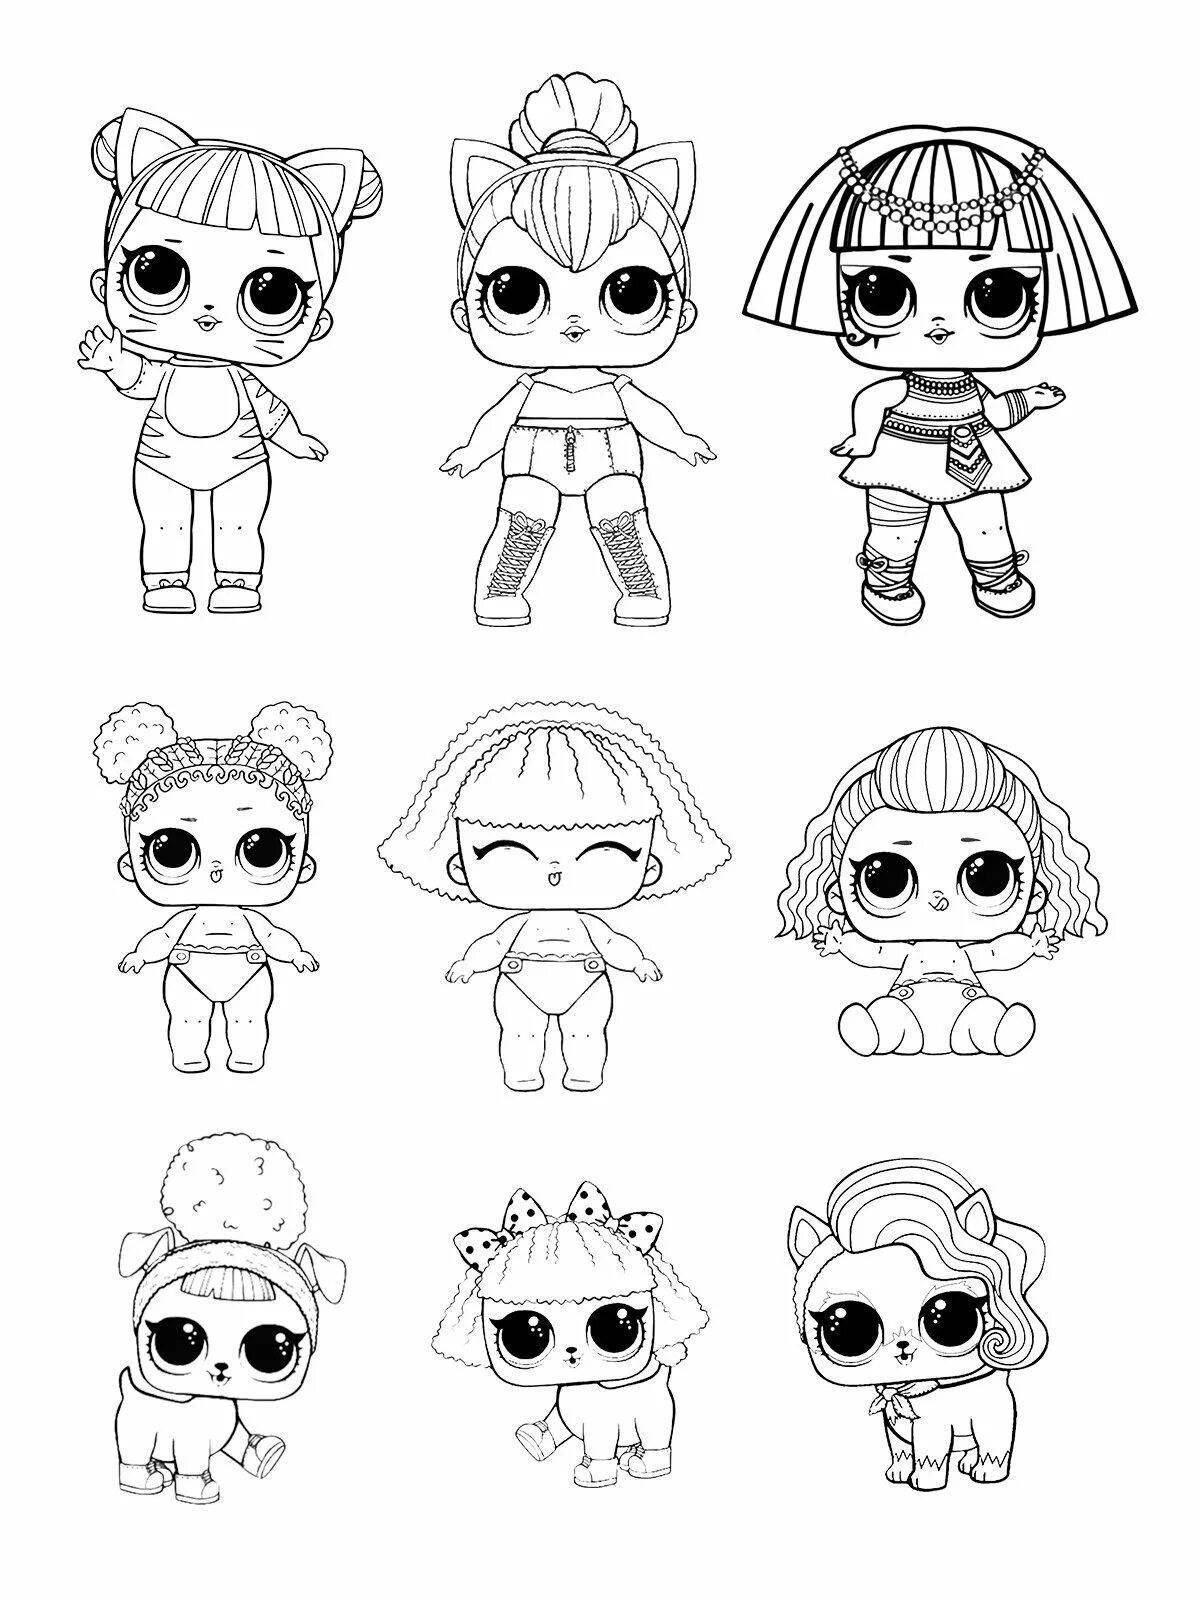 Colorful lol doll coloring page